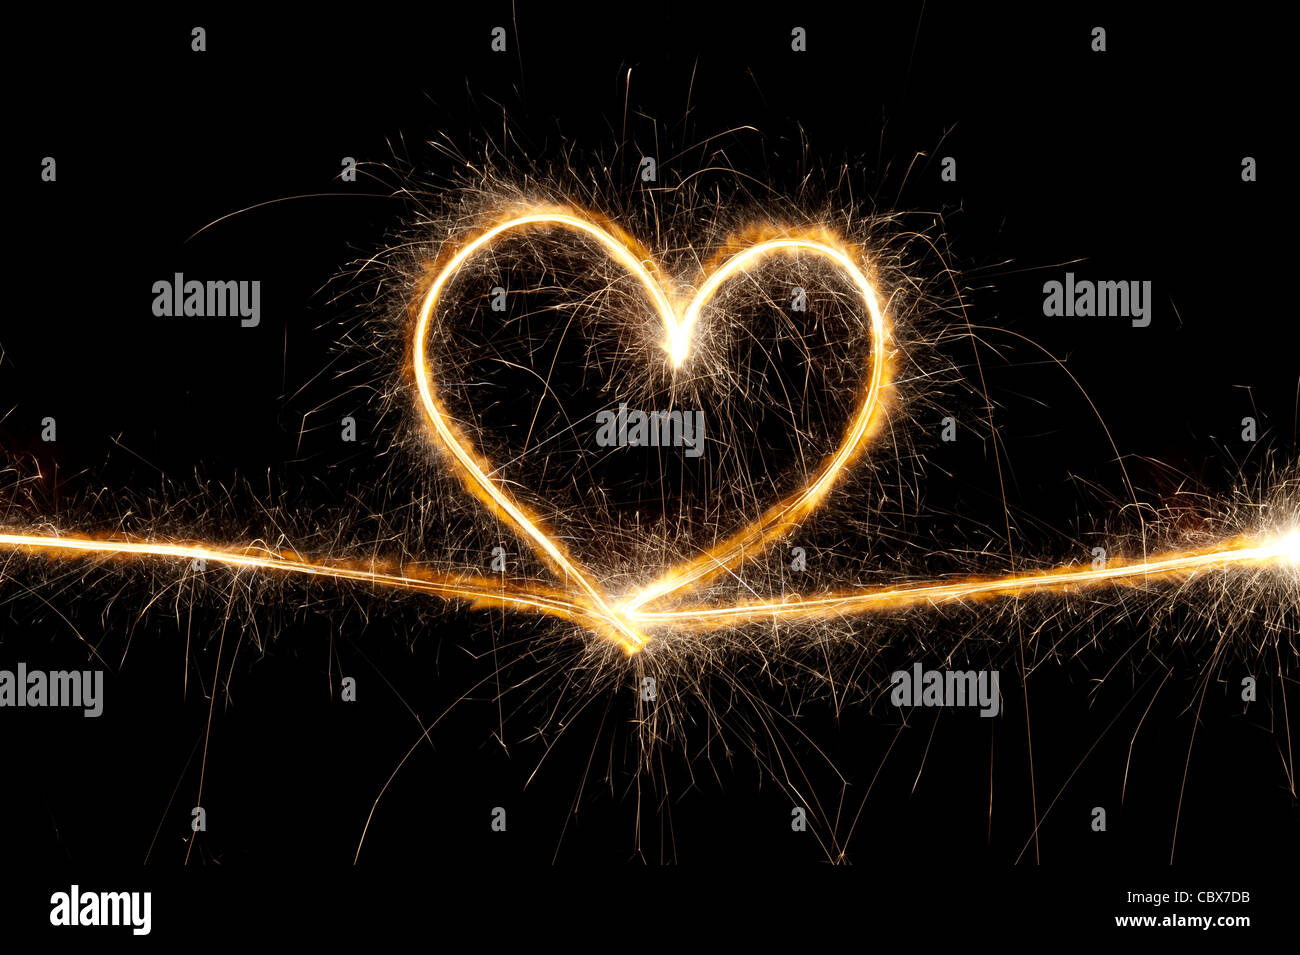 Heart shape made with sparkler at night. Stock Photo